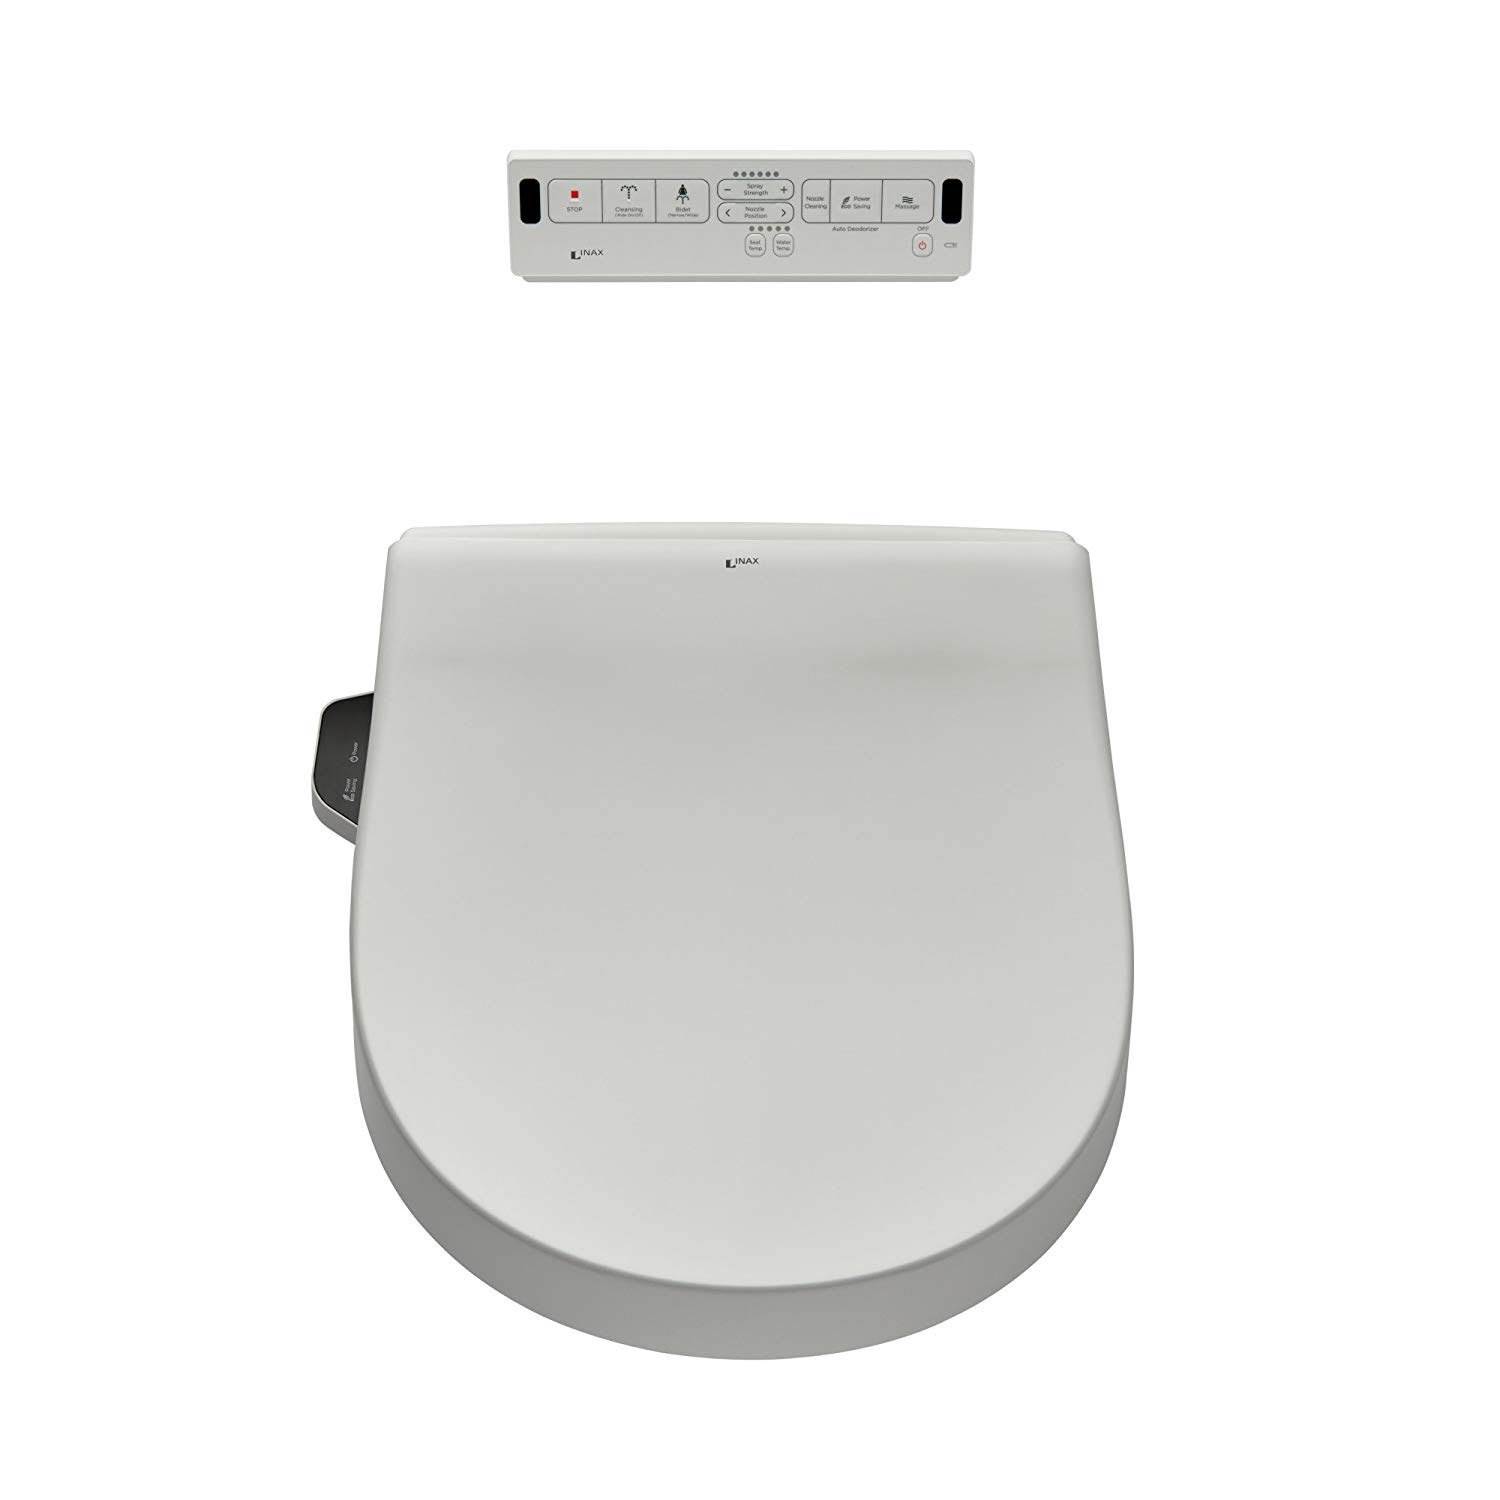 American Standard INAX 415 Heated Dual Nozzle Shower Bidet Toilet Seat w/ Remote - image 1 of 6